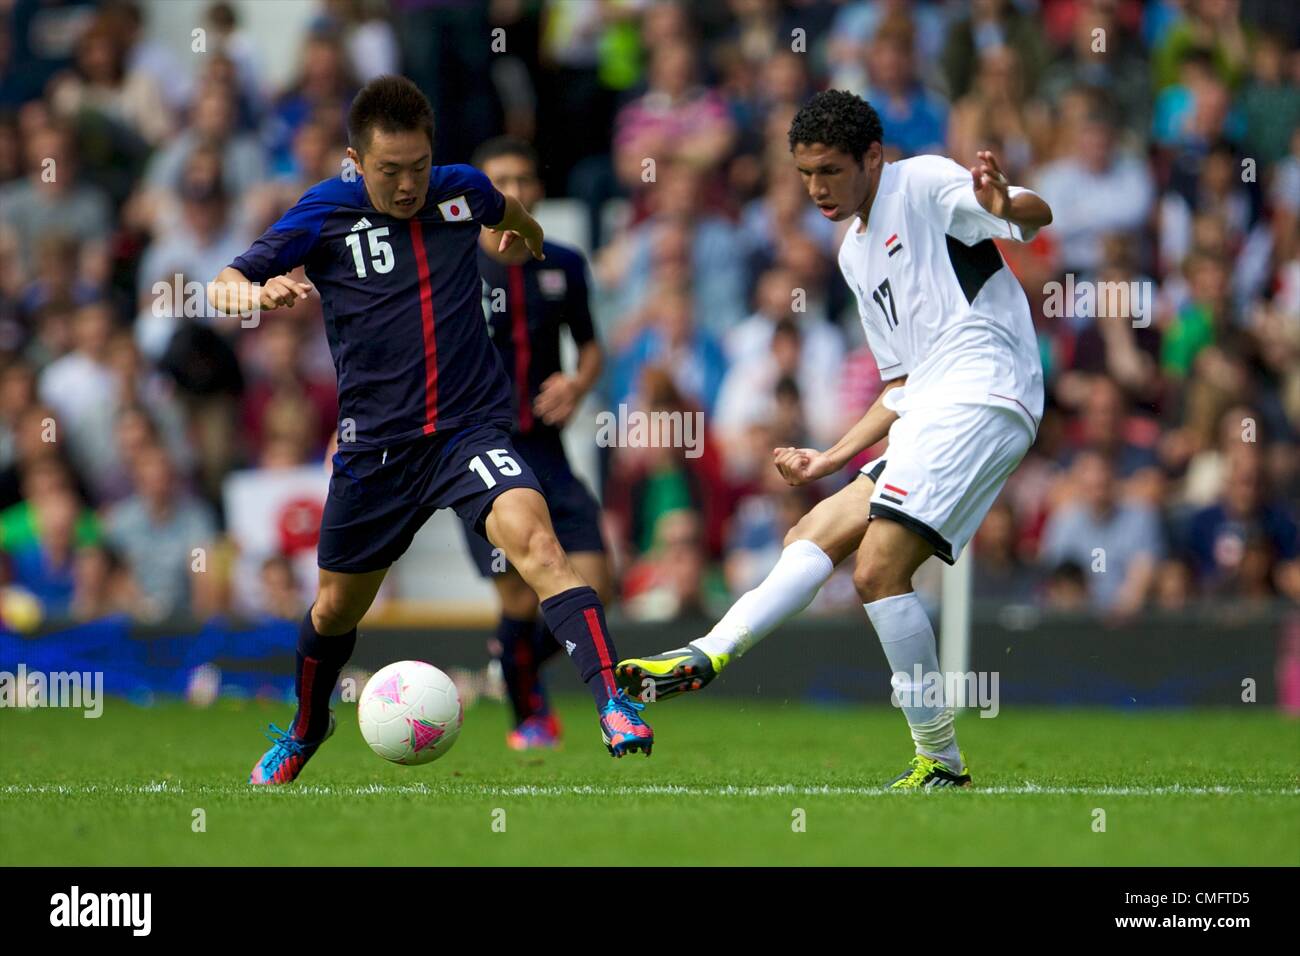 UK. 04.08.2012 Manchester, England. Egypt midfielder Mohamed El-Nenny and Japan forward Manabu Saito in action during the quarter final match between Japan and Egypt at Old Trafford. Japan won the game by a score of 3-0 to proceed to the tournament semi-finals. Stock Photo